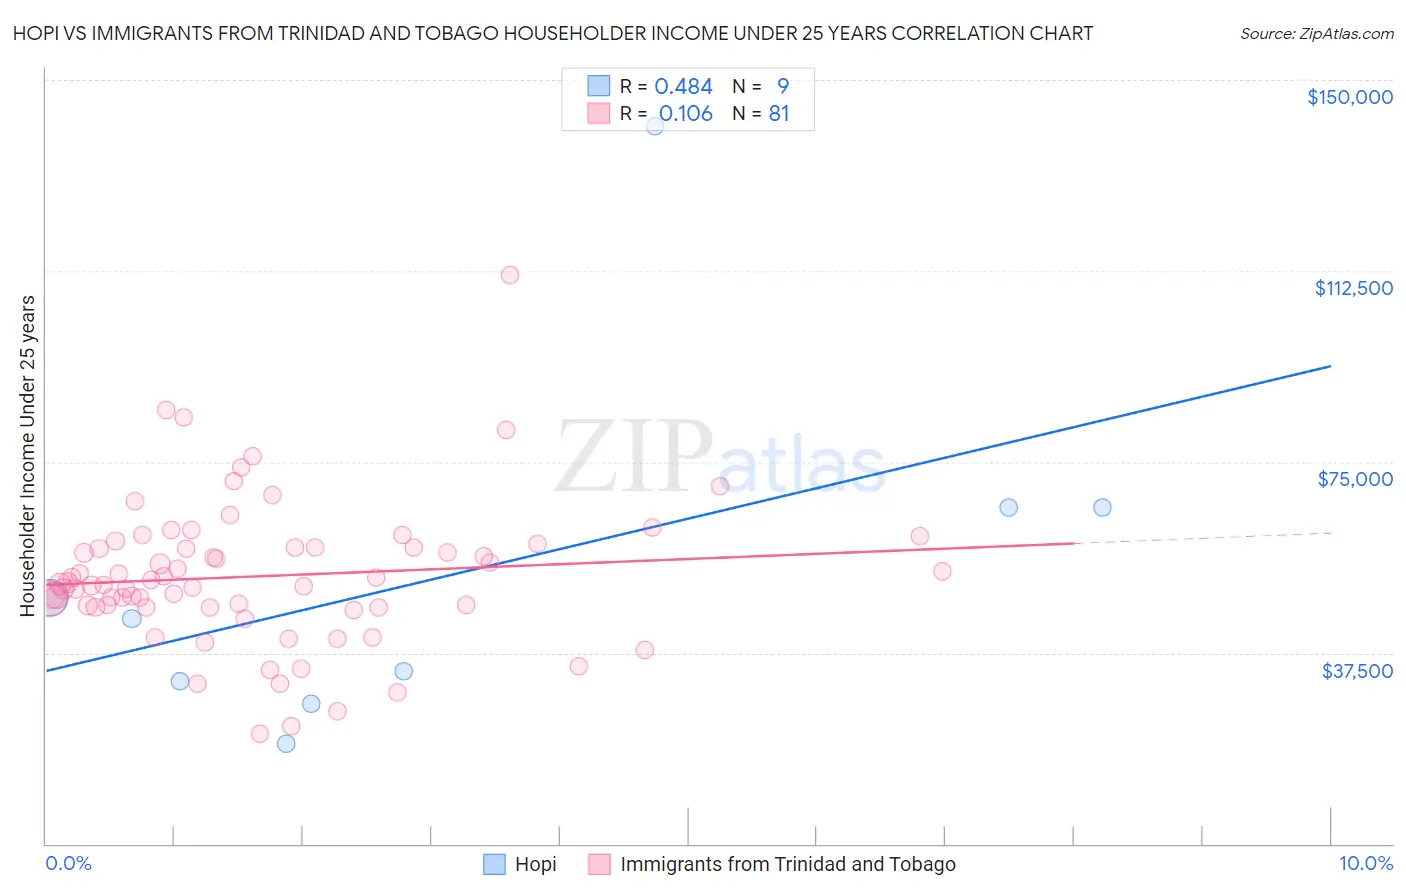 Hopi vs Immigrants from Trinidad and Tobago Householder Income Under 25 years